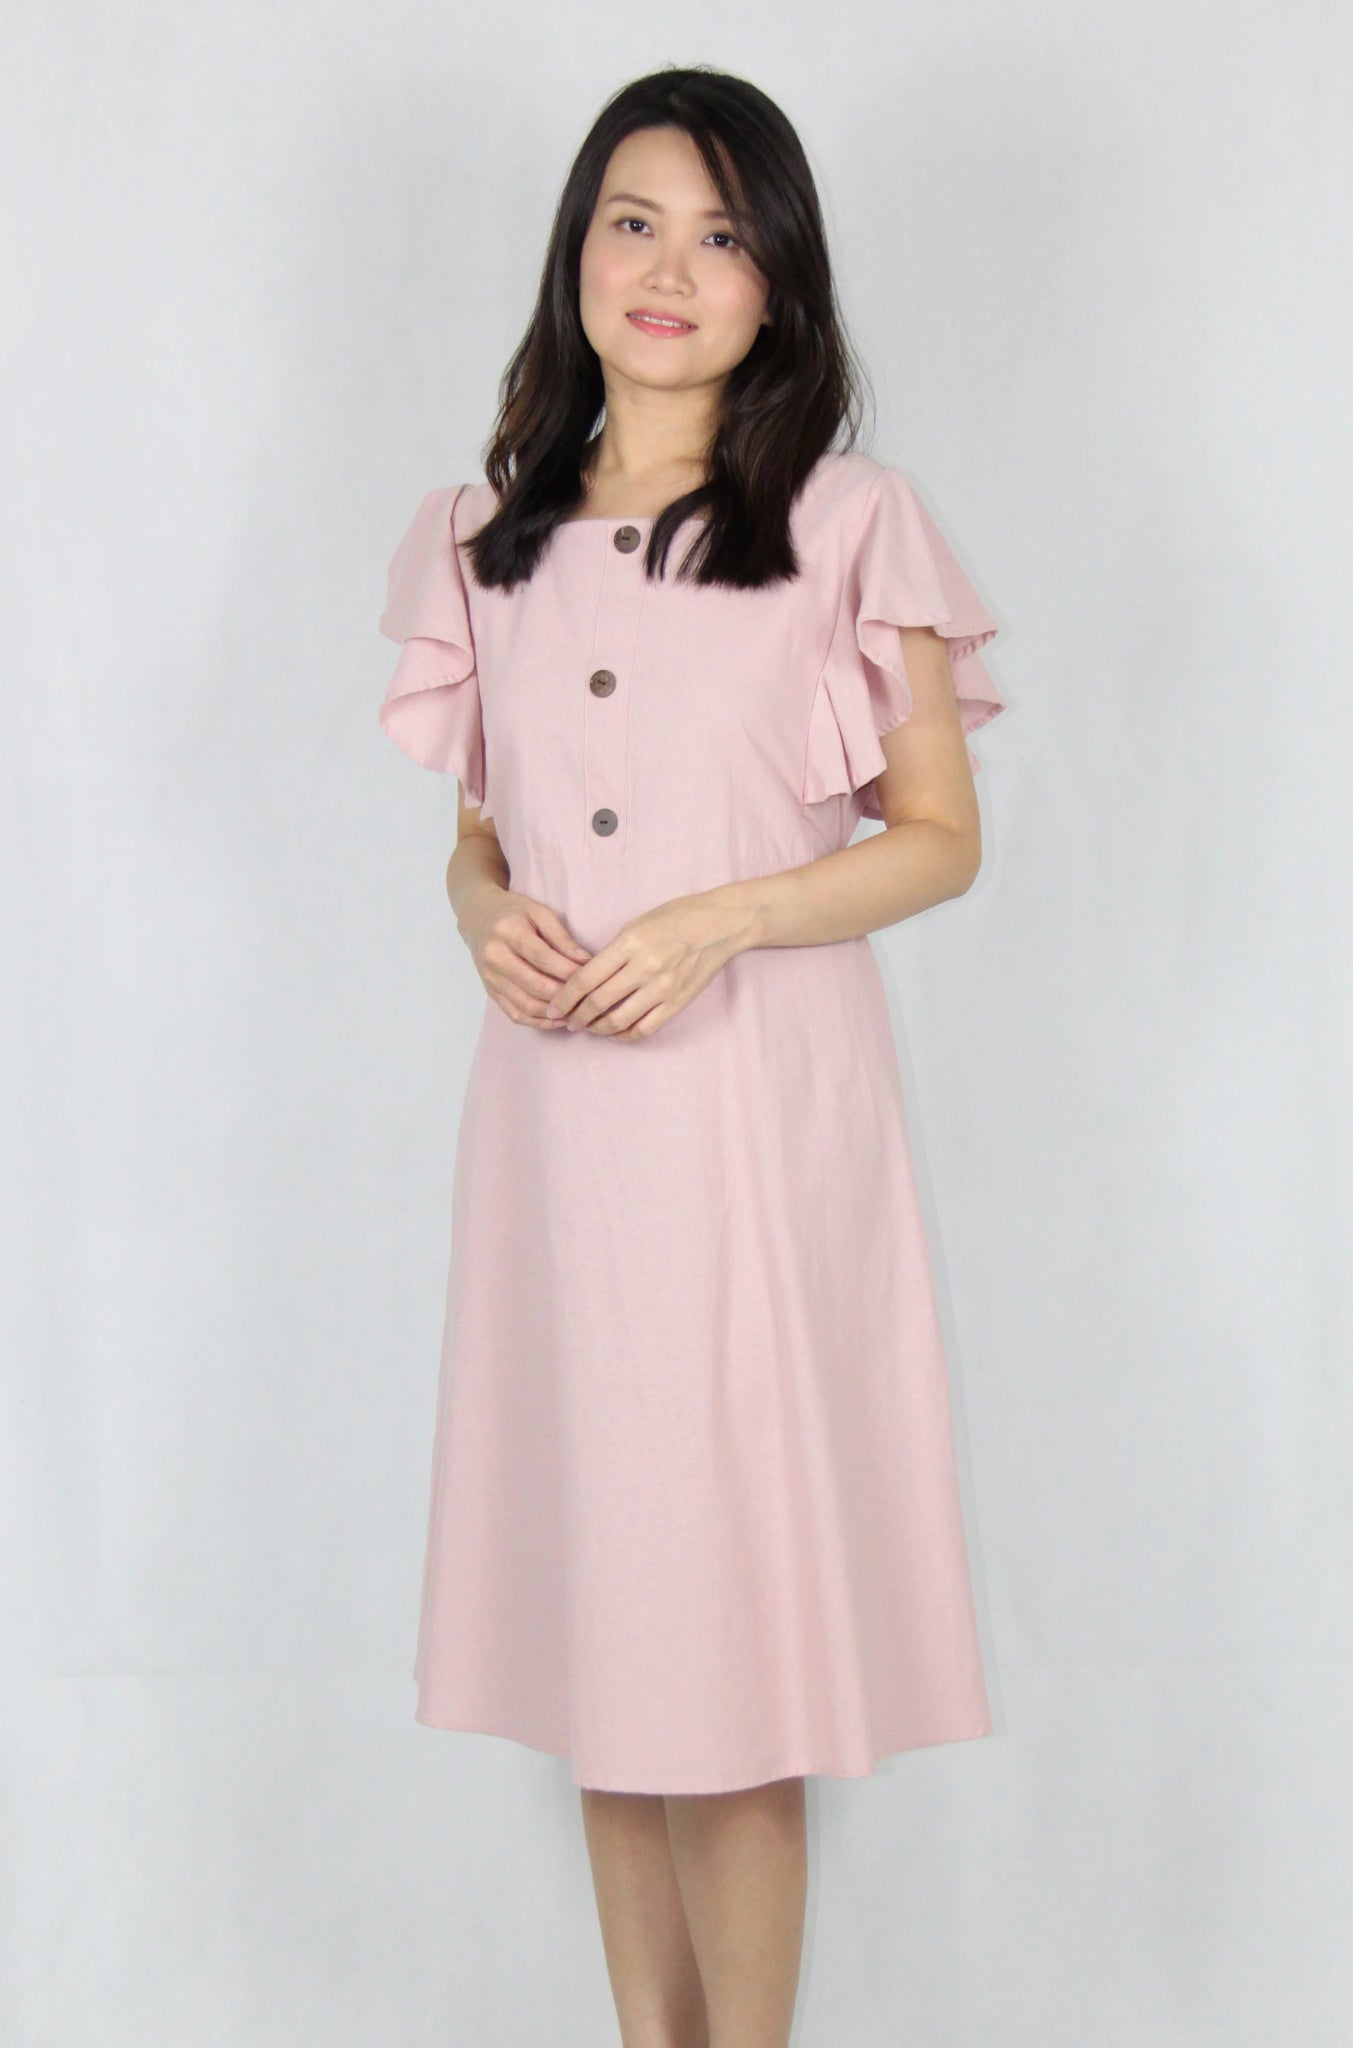 Square Neck Ruffles Sleeve Flare Dress in Pink